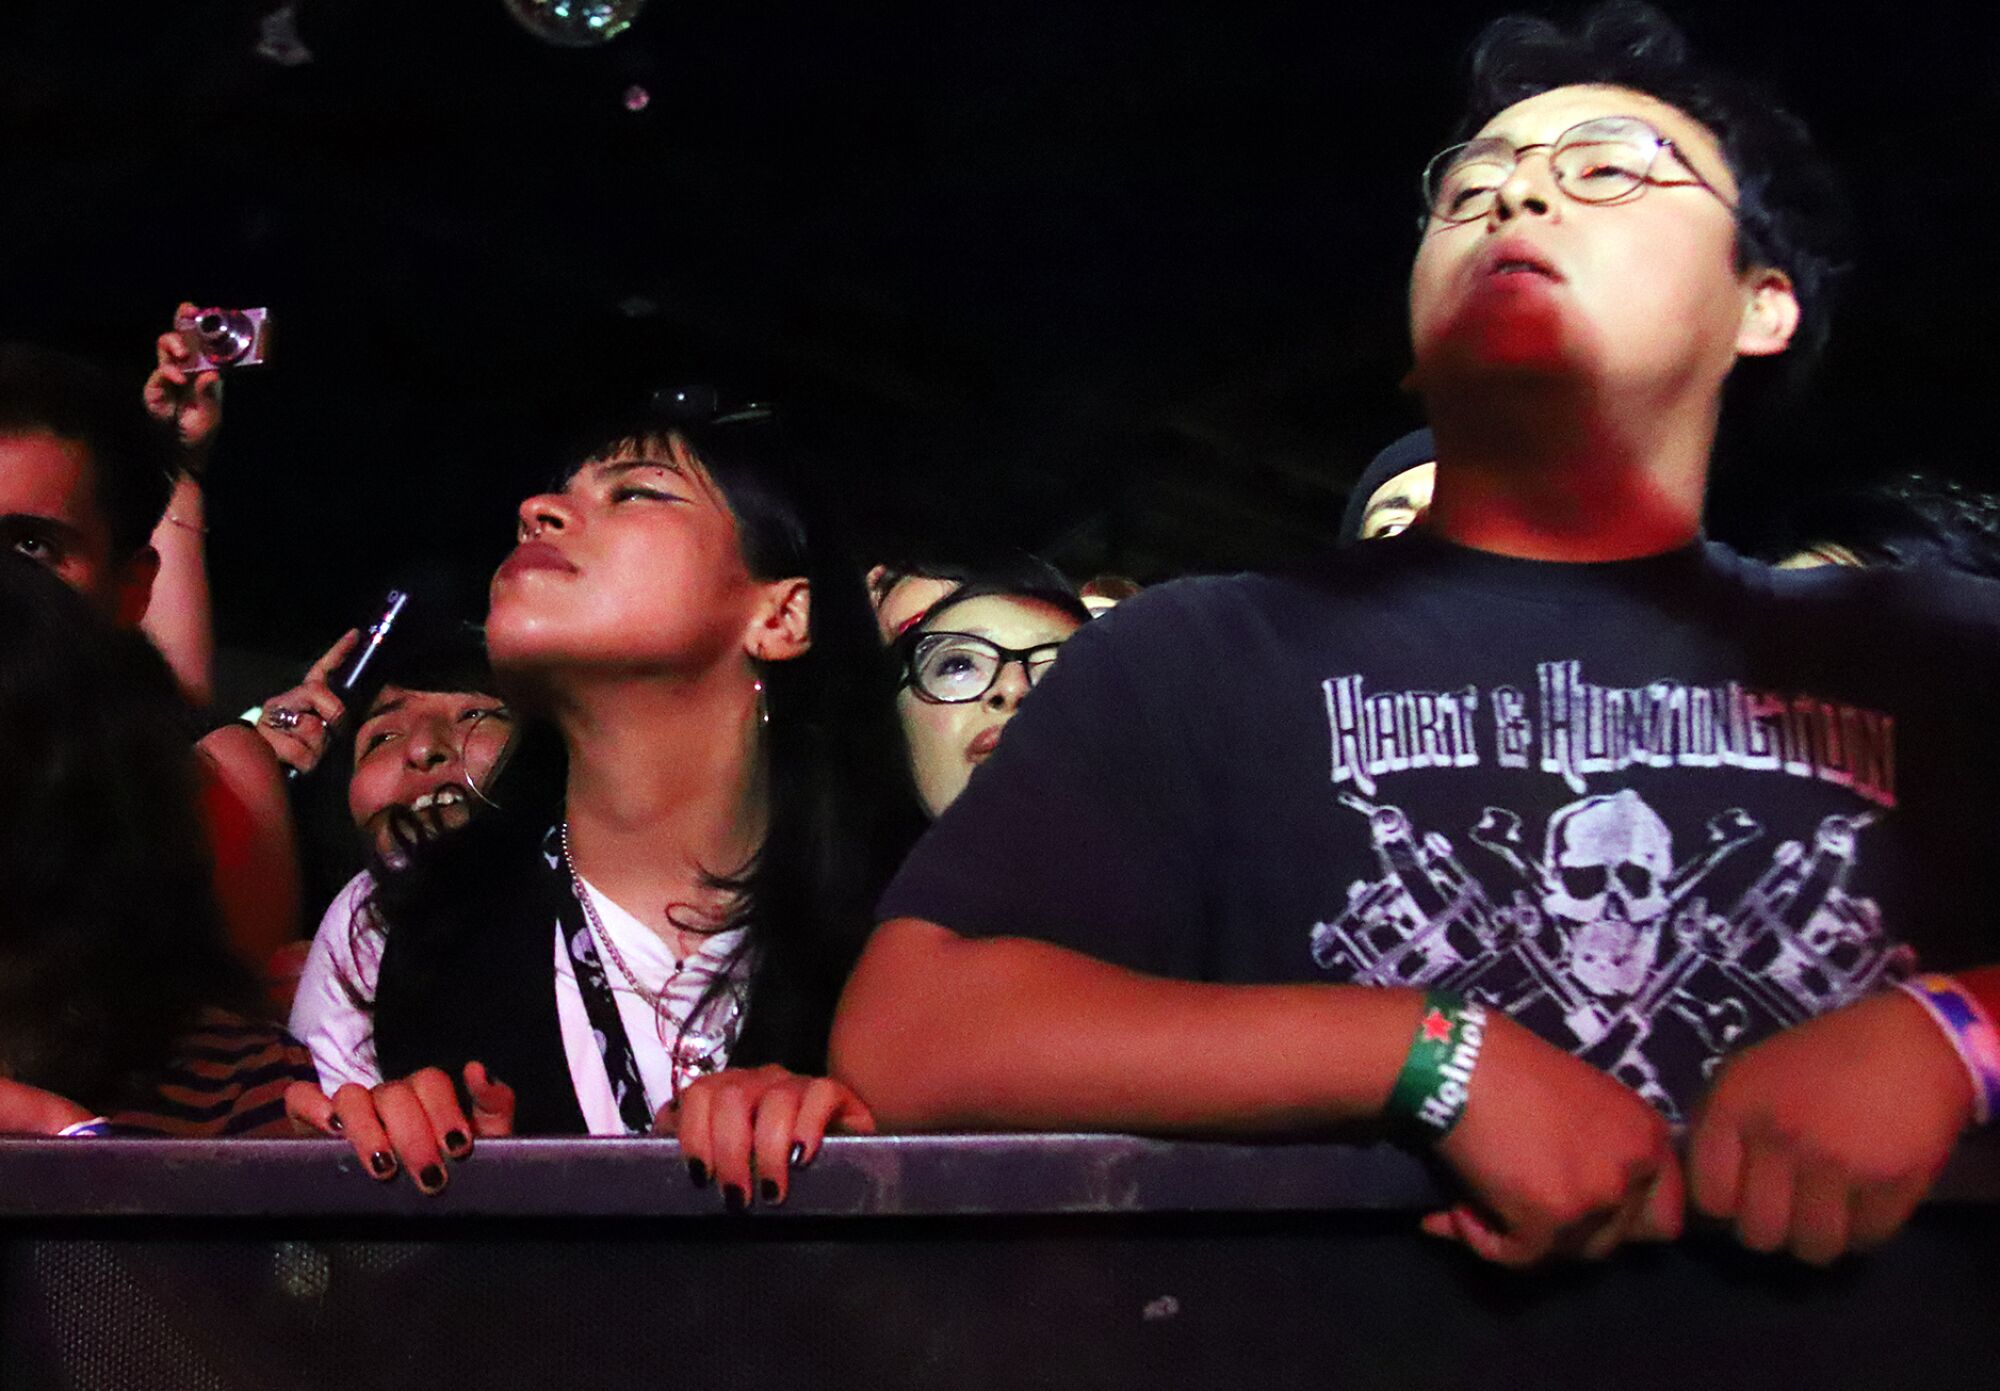 Two people watch a band perform.